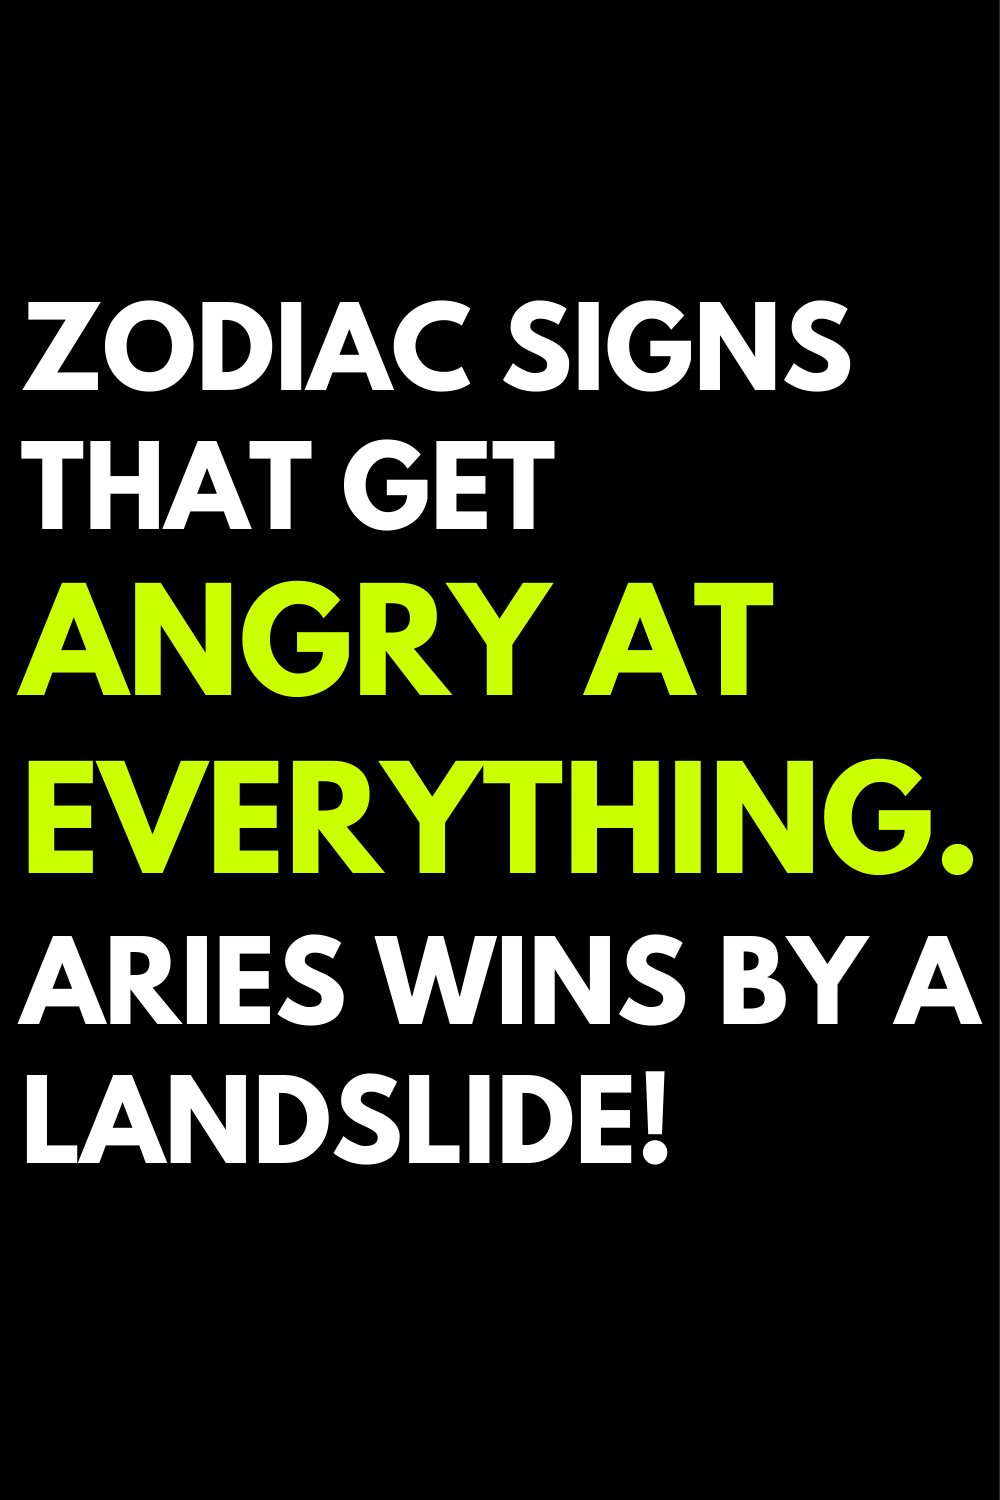 Zodiac signs that get angry at everything. Aries wins by a landslide!